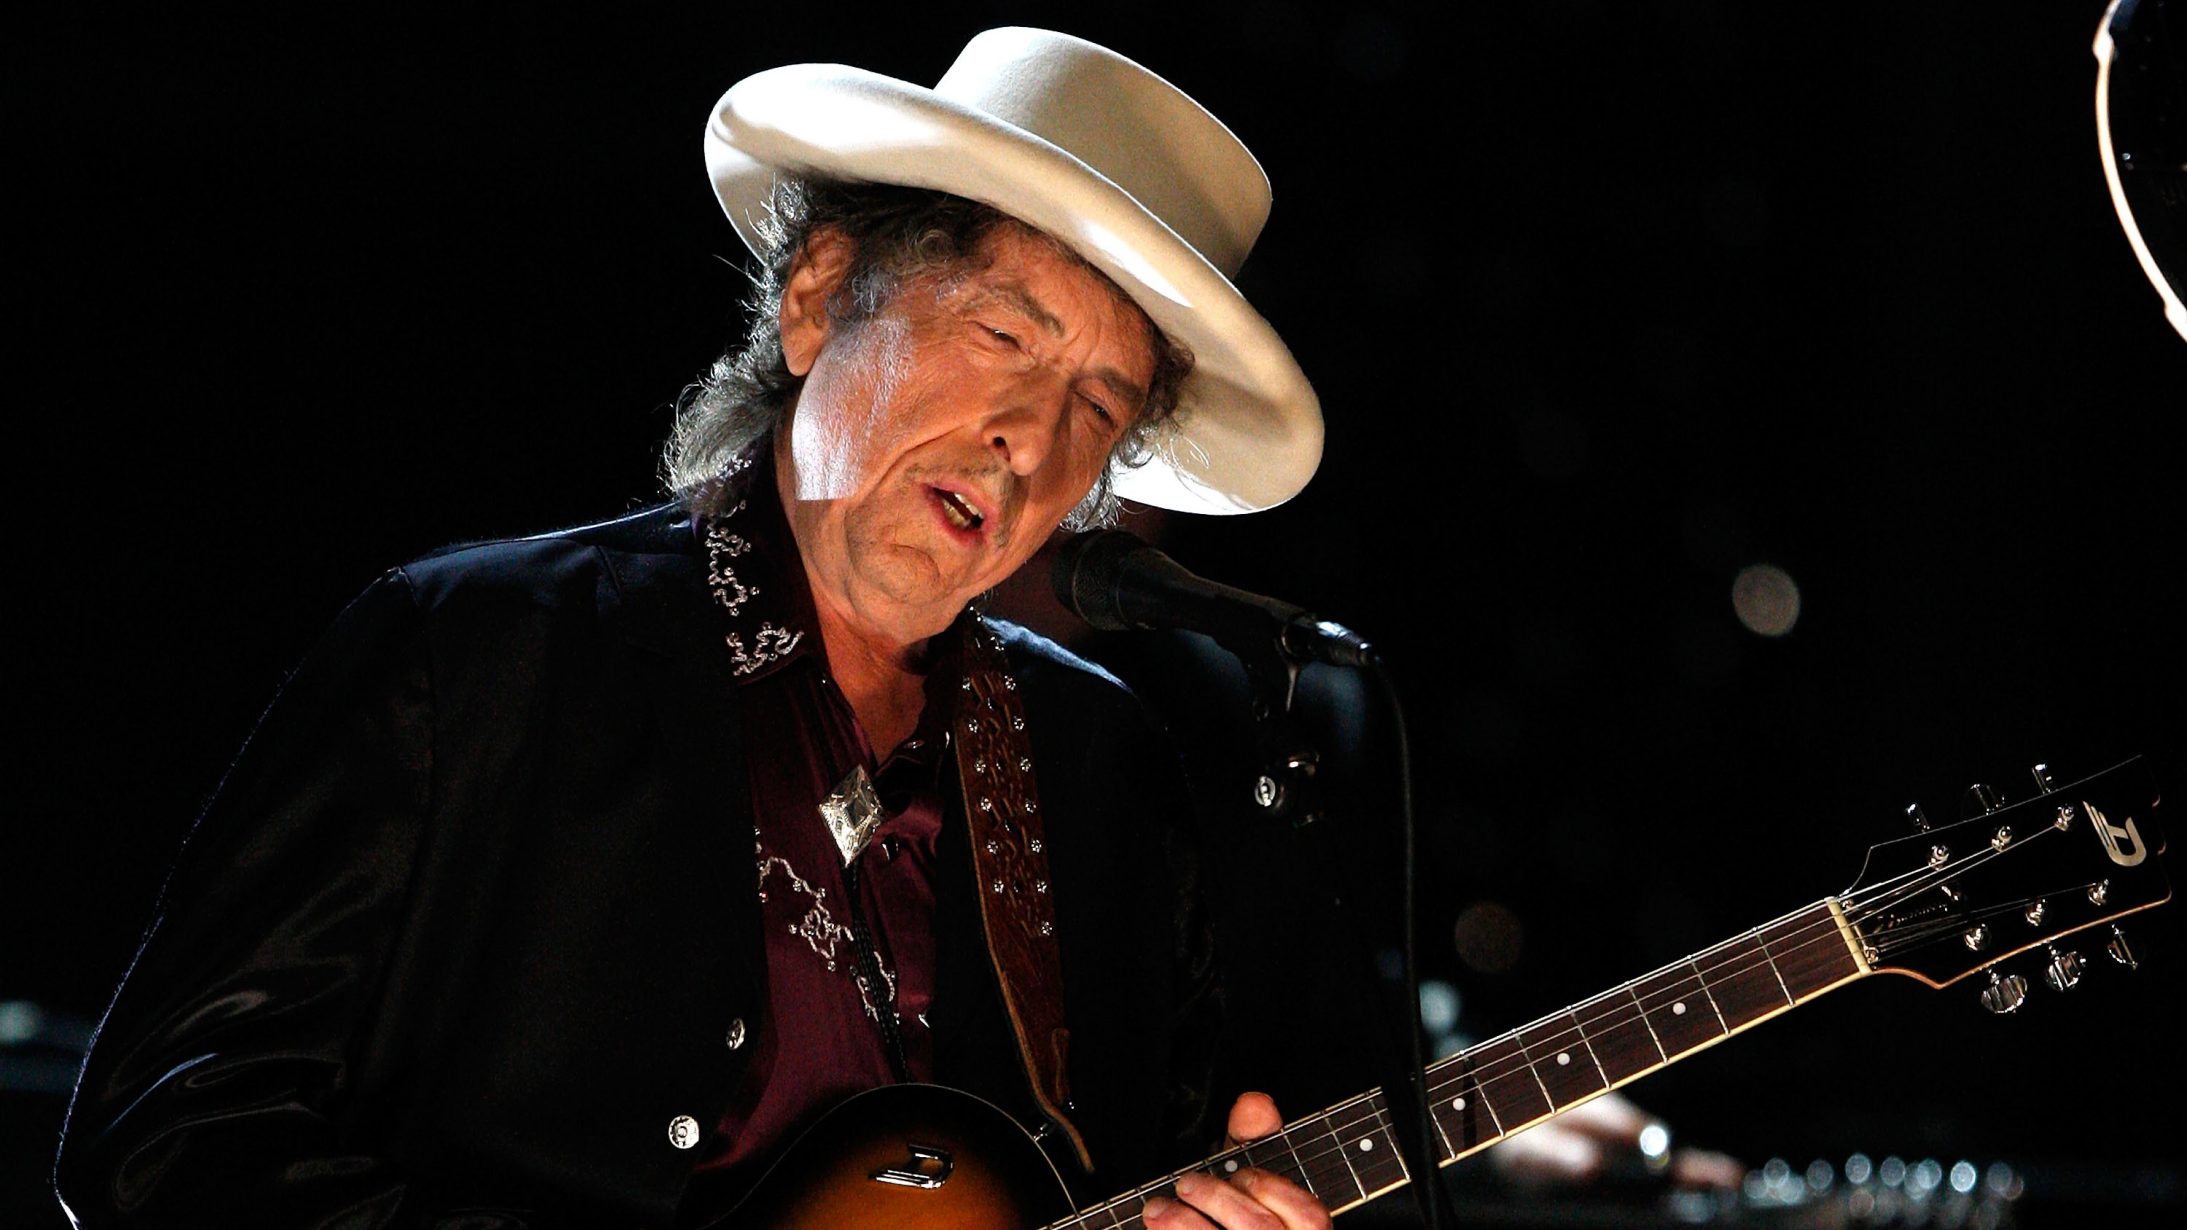 Bob Dylan's new album, Rough and Rowdy Ways, comes out June 19.